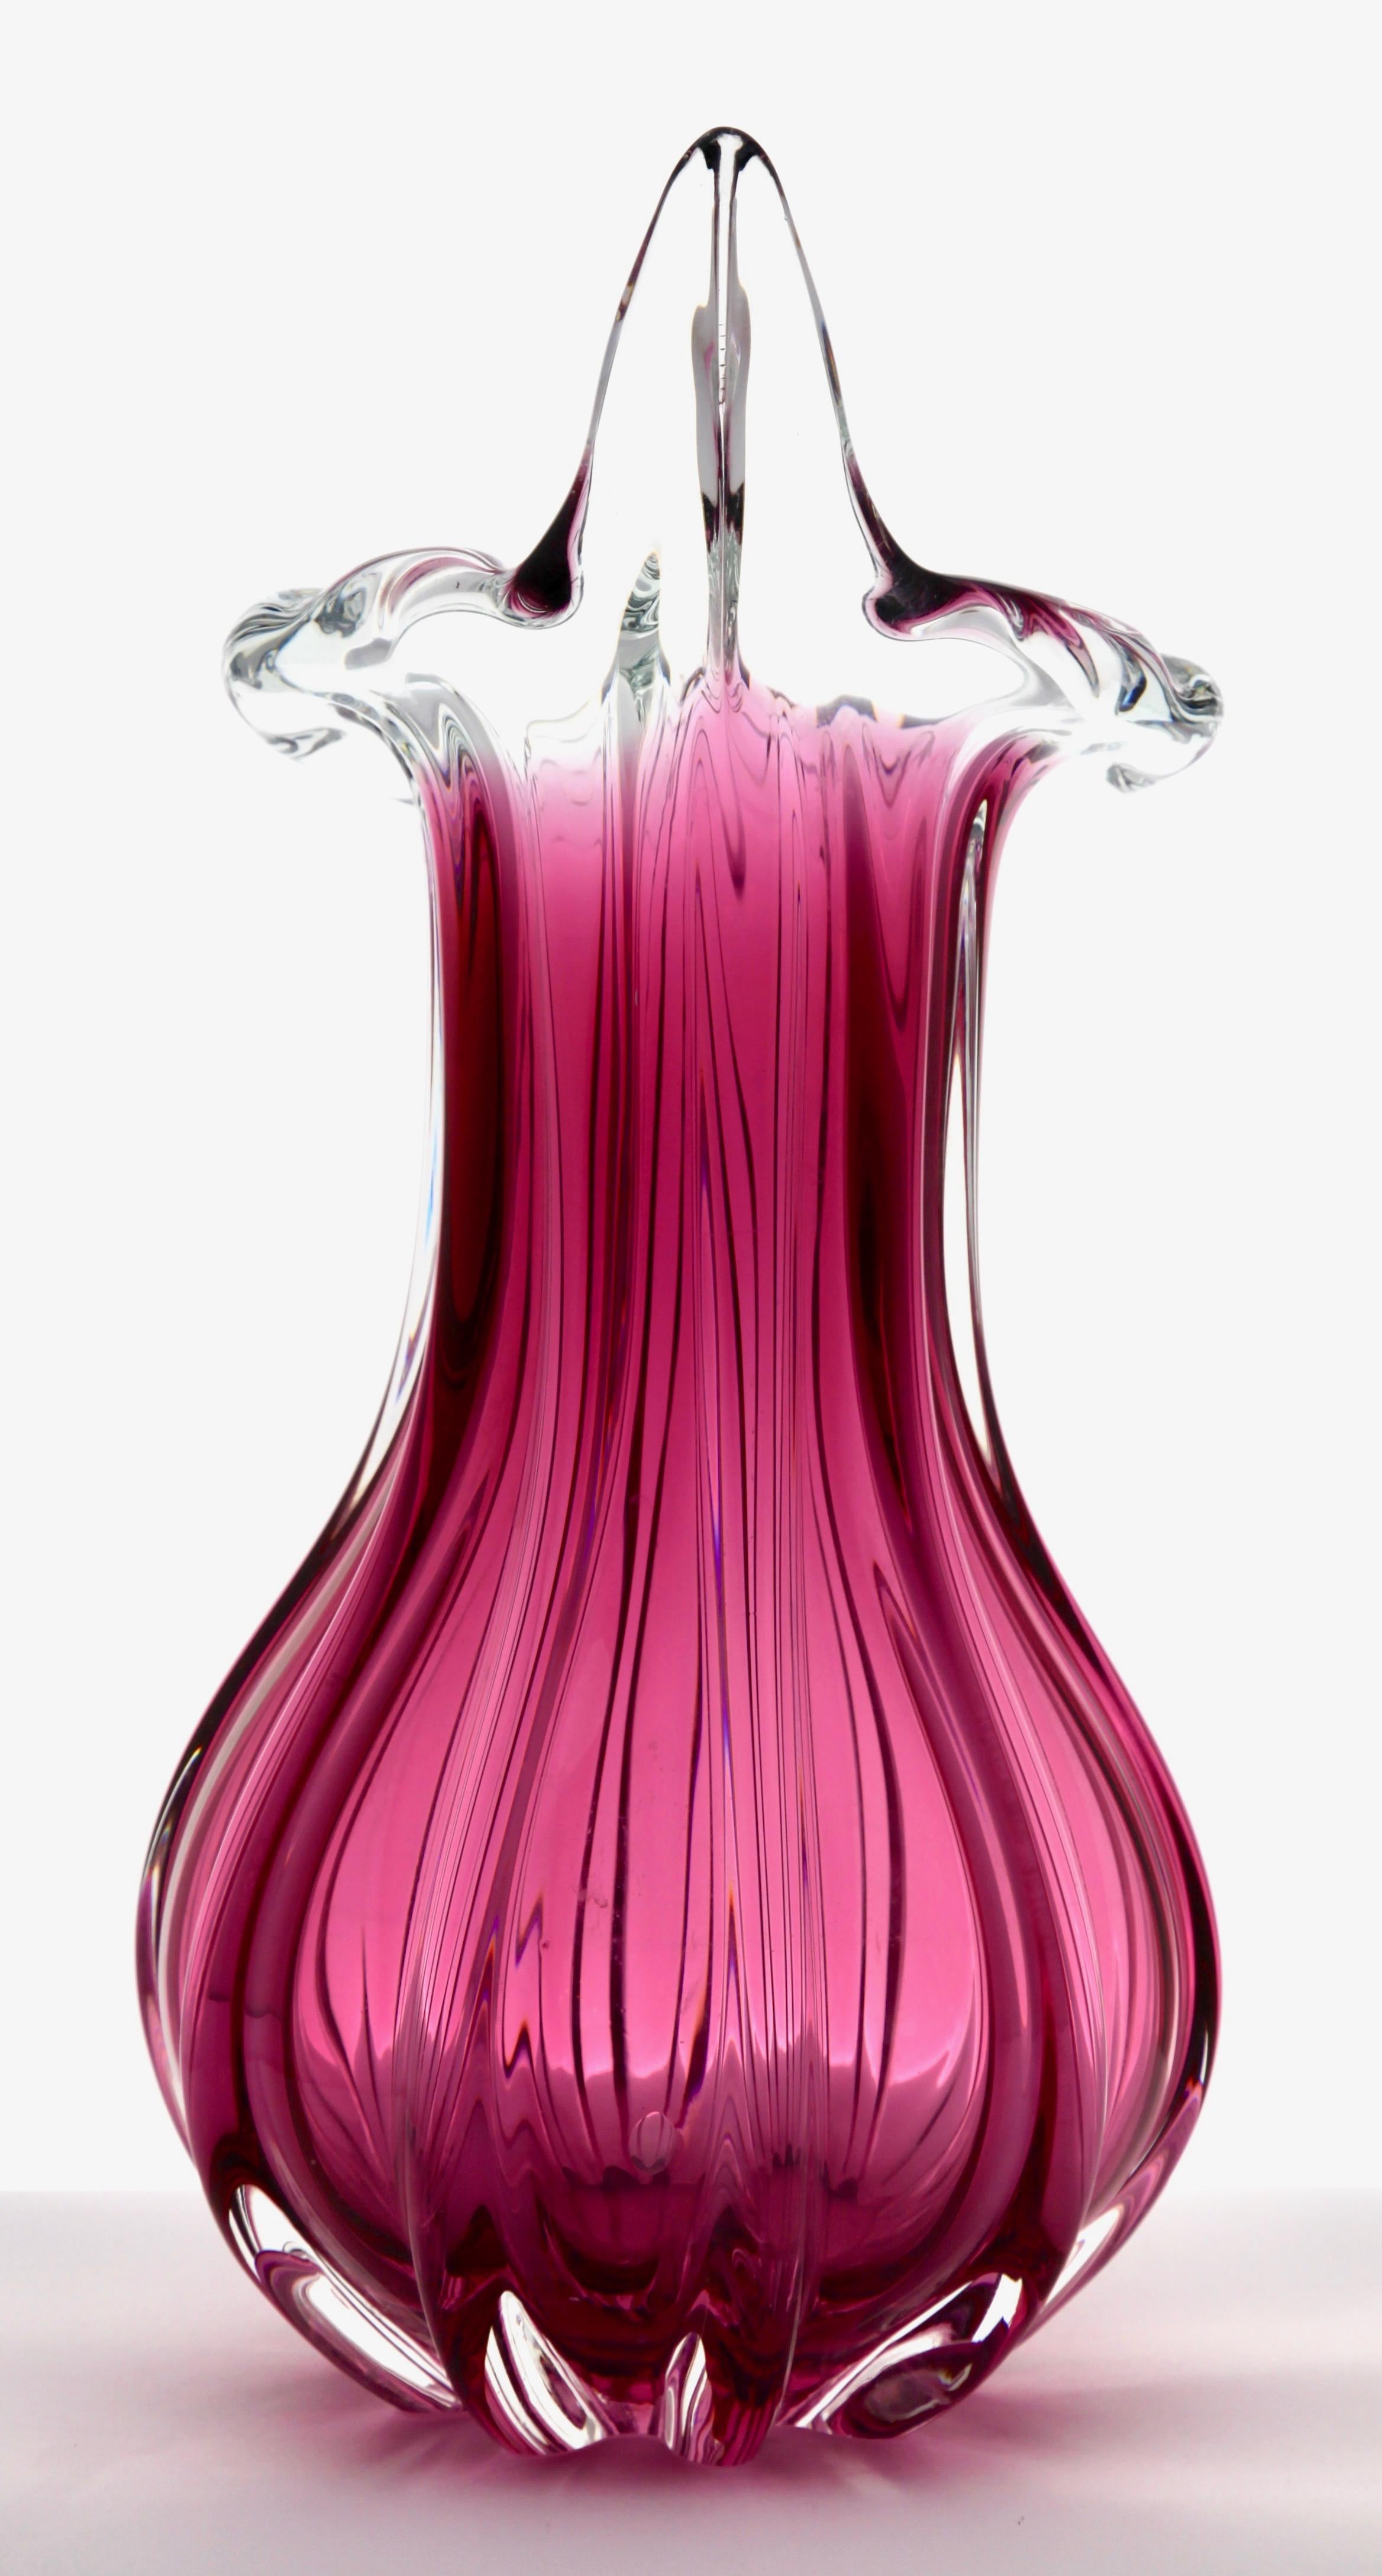 Italian Large Murano Jack-in-Pulpit Vase in Purple, Attributed to Barovier & Toso, 1950s